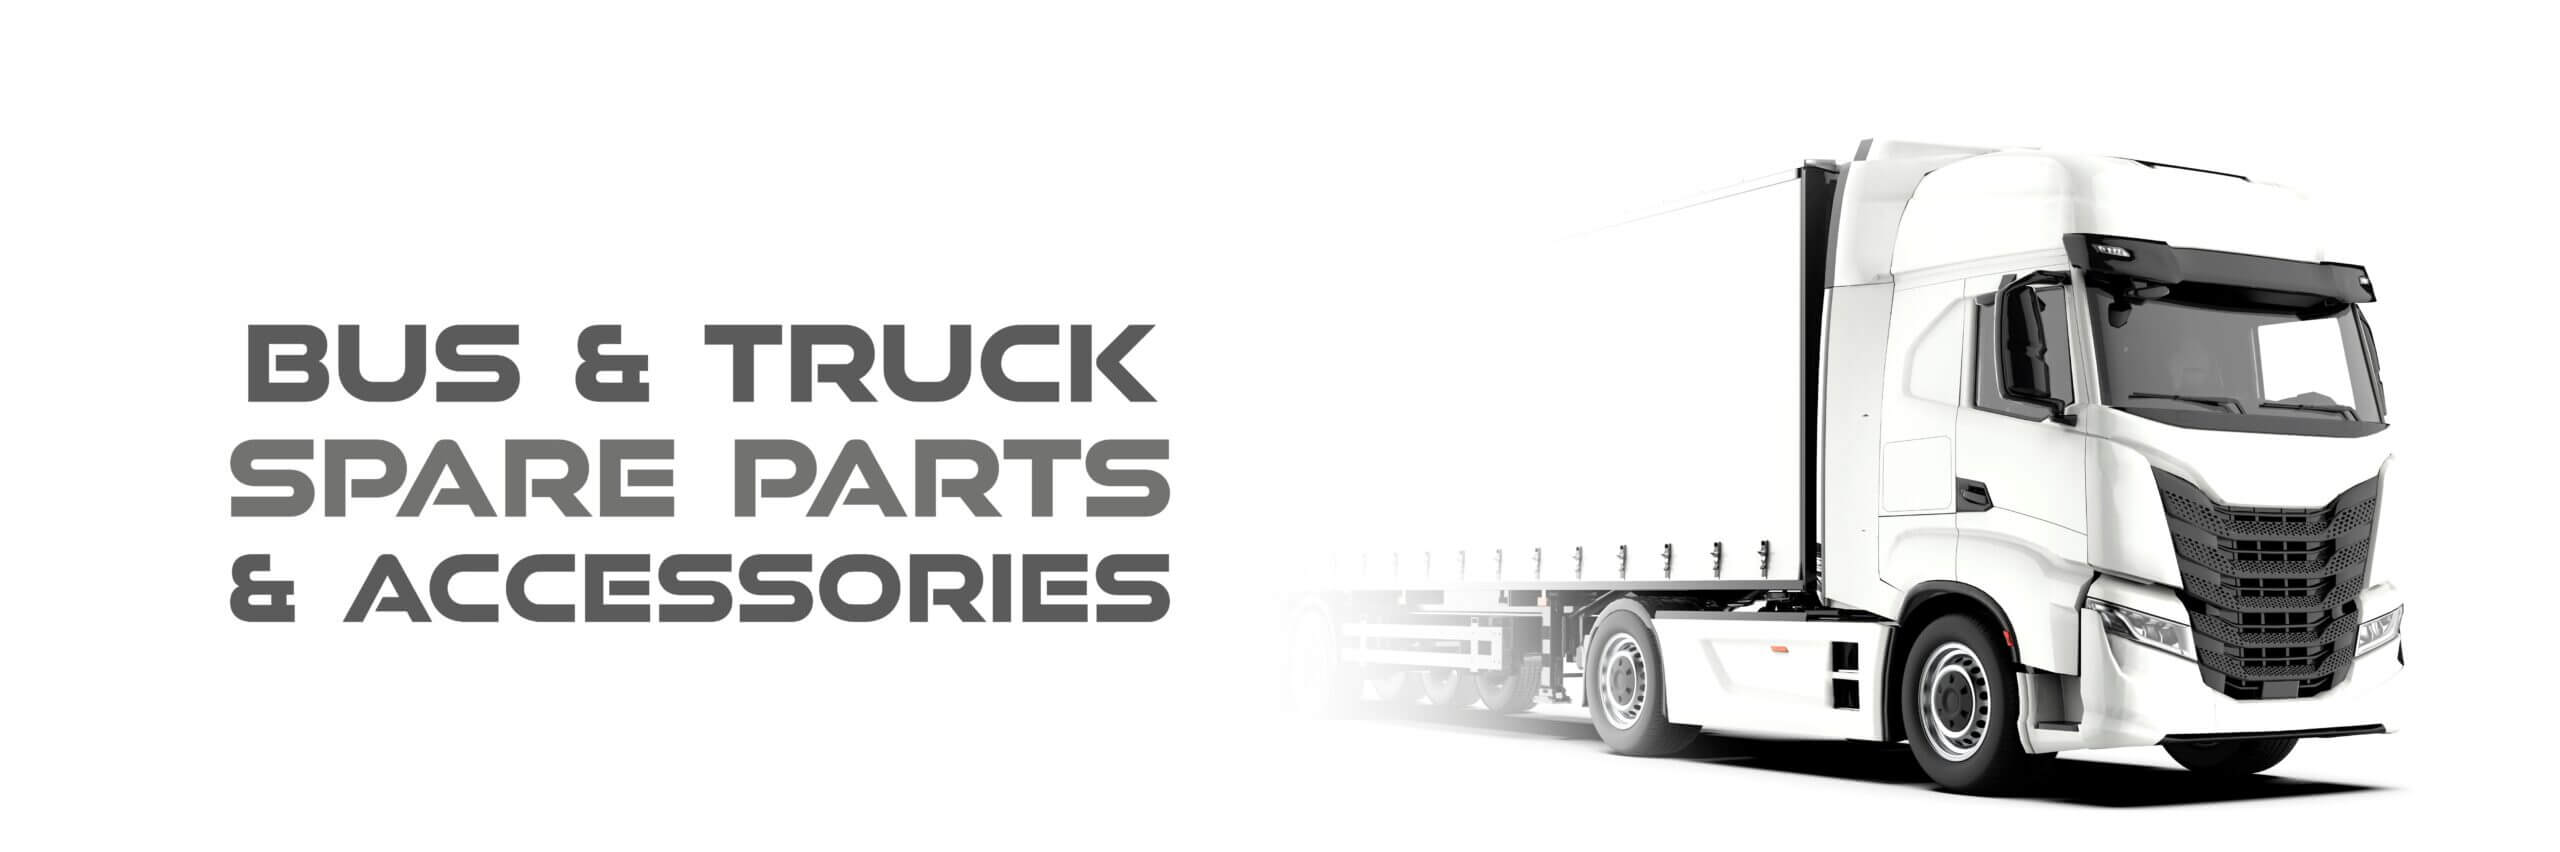 Bus and Truck Spare Parts Banner Image